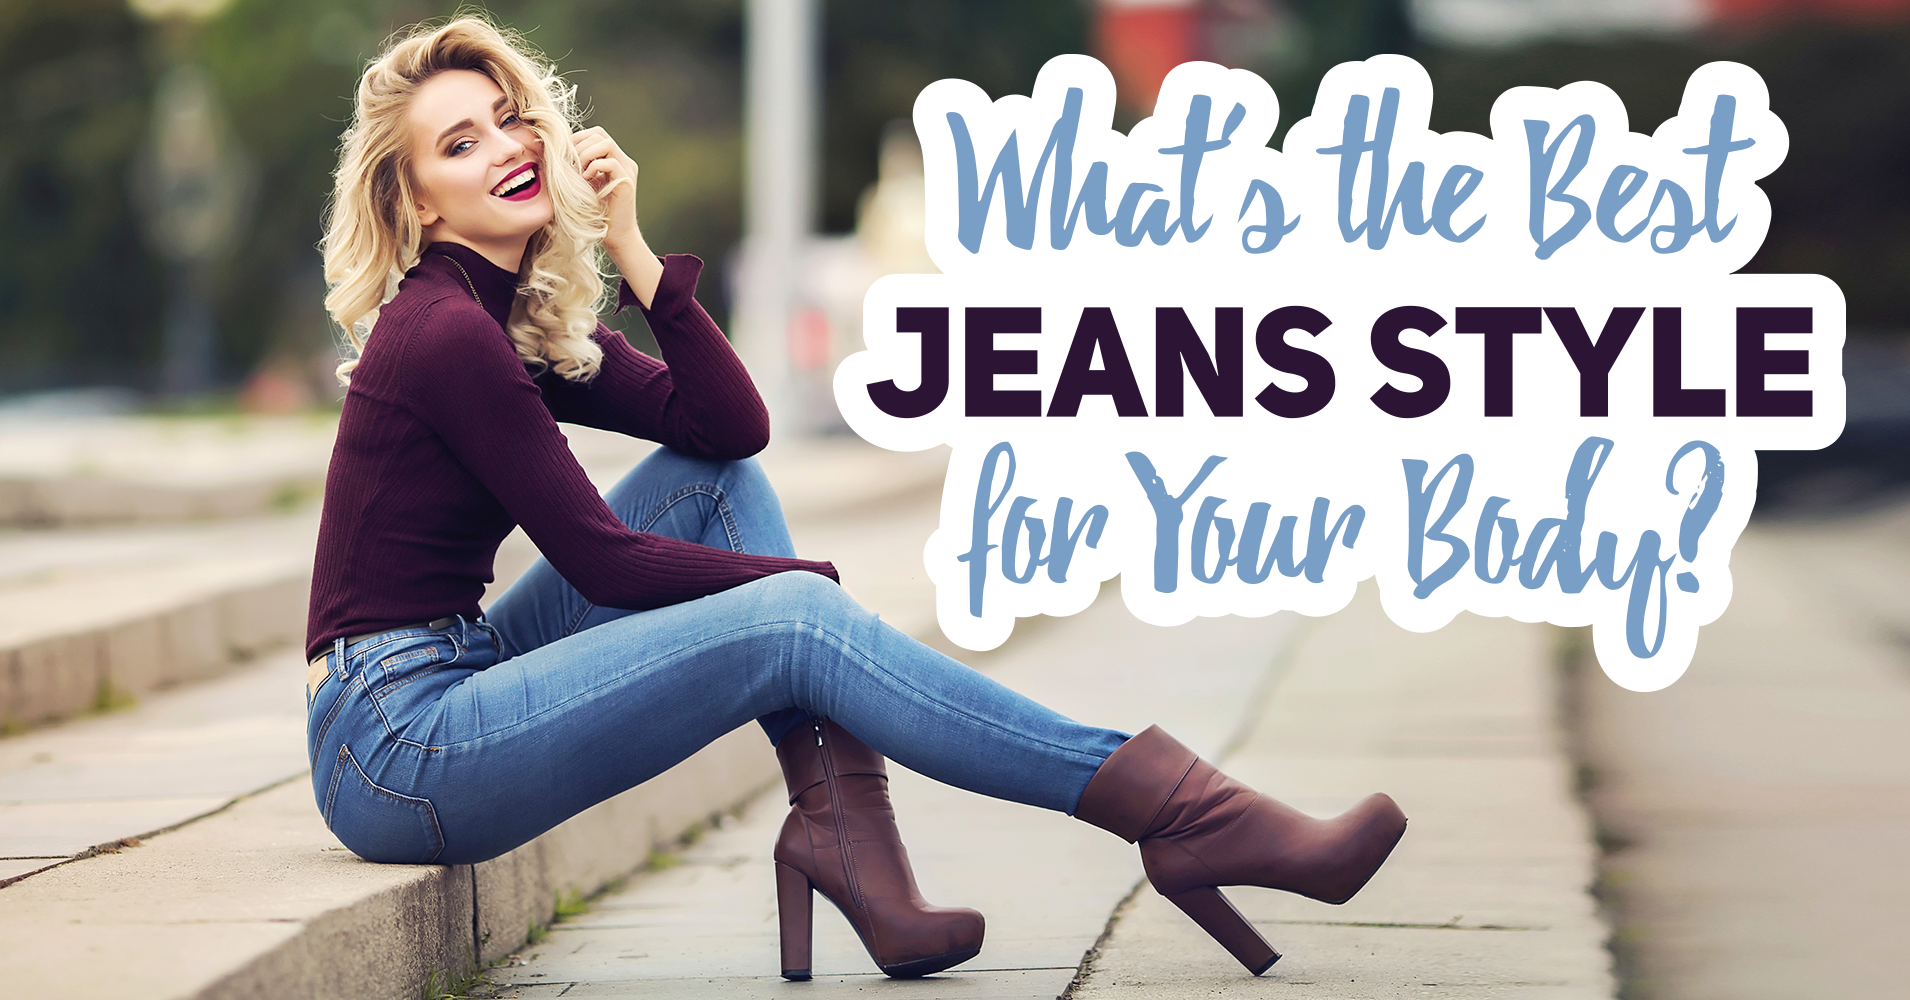 Best Jeans Style for Your Body? - Quiz 